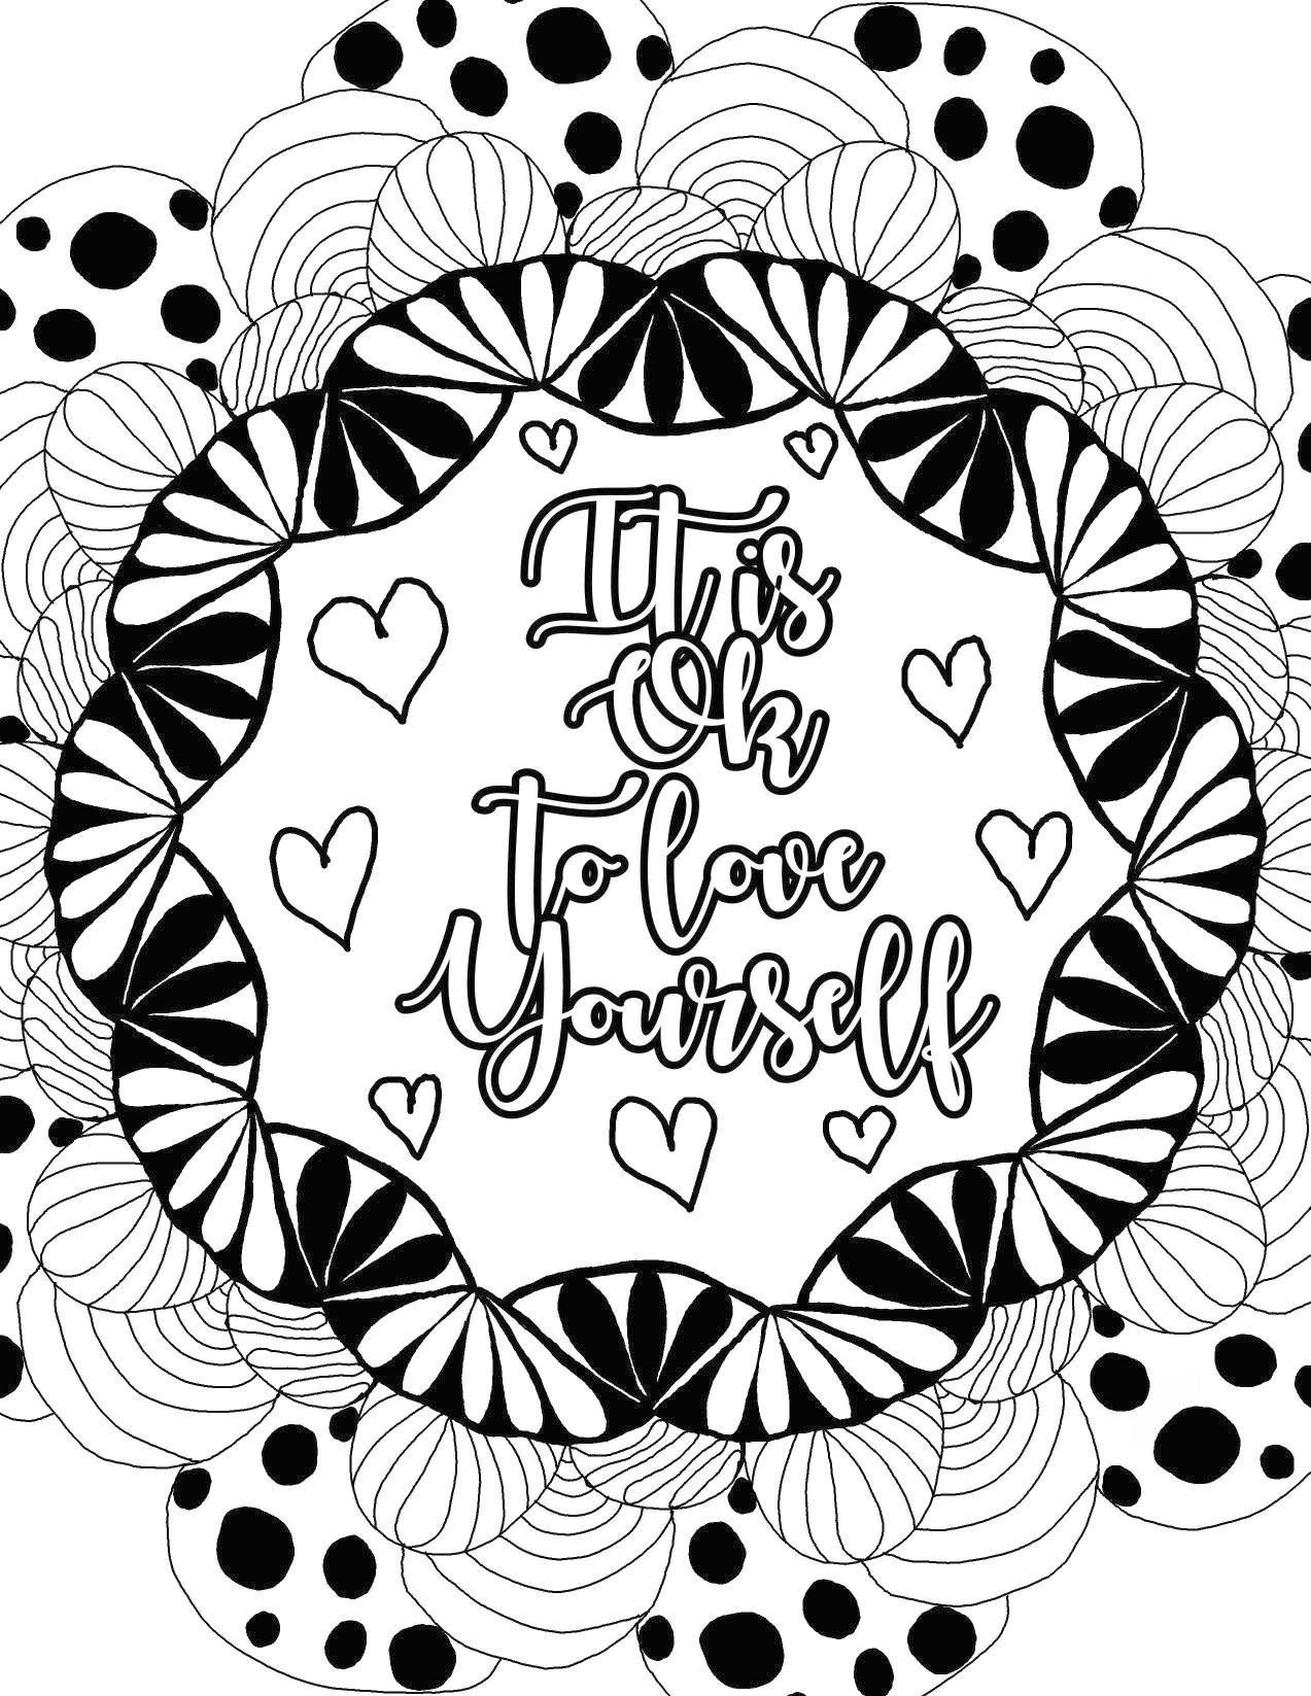 20-free-printable-printable-adult-coloring-pages-quotes-everfreecoloring